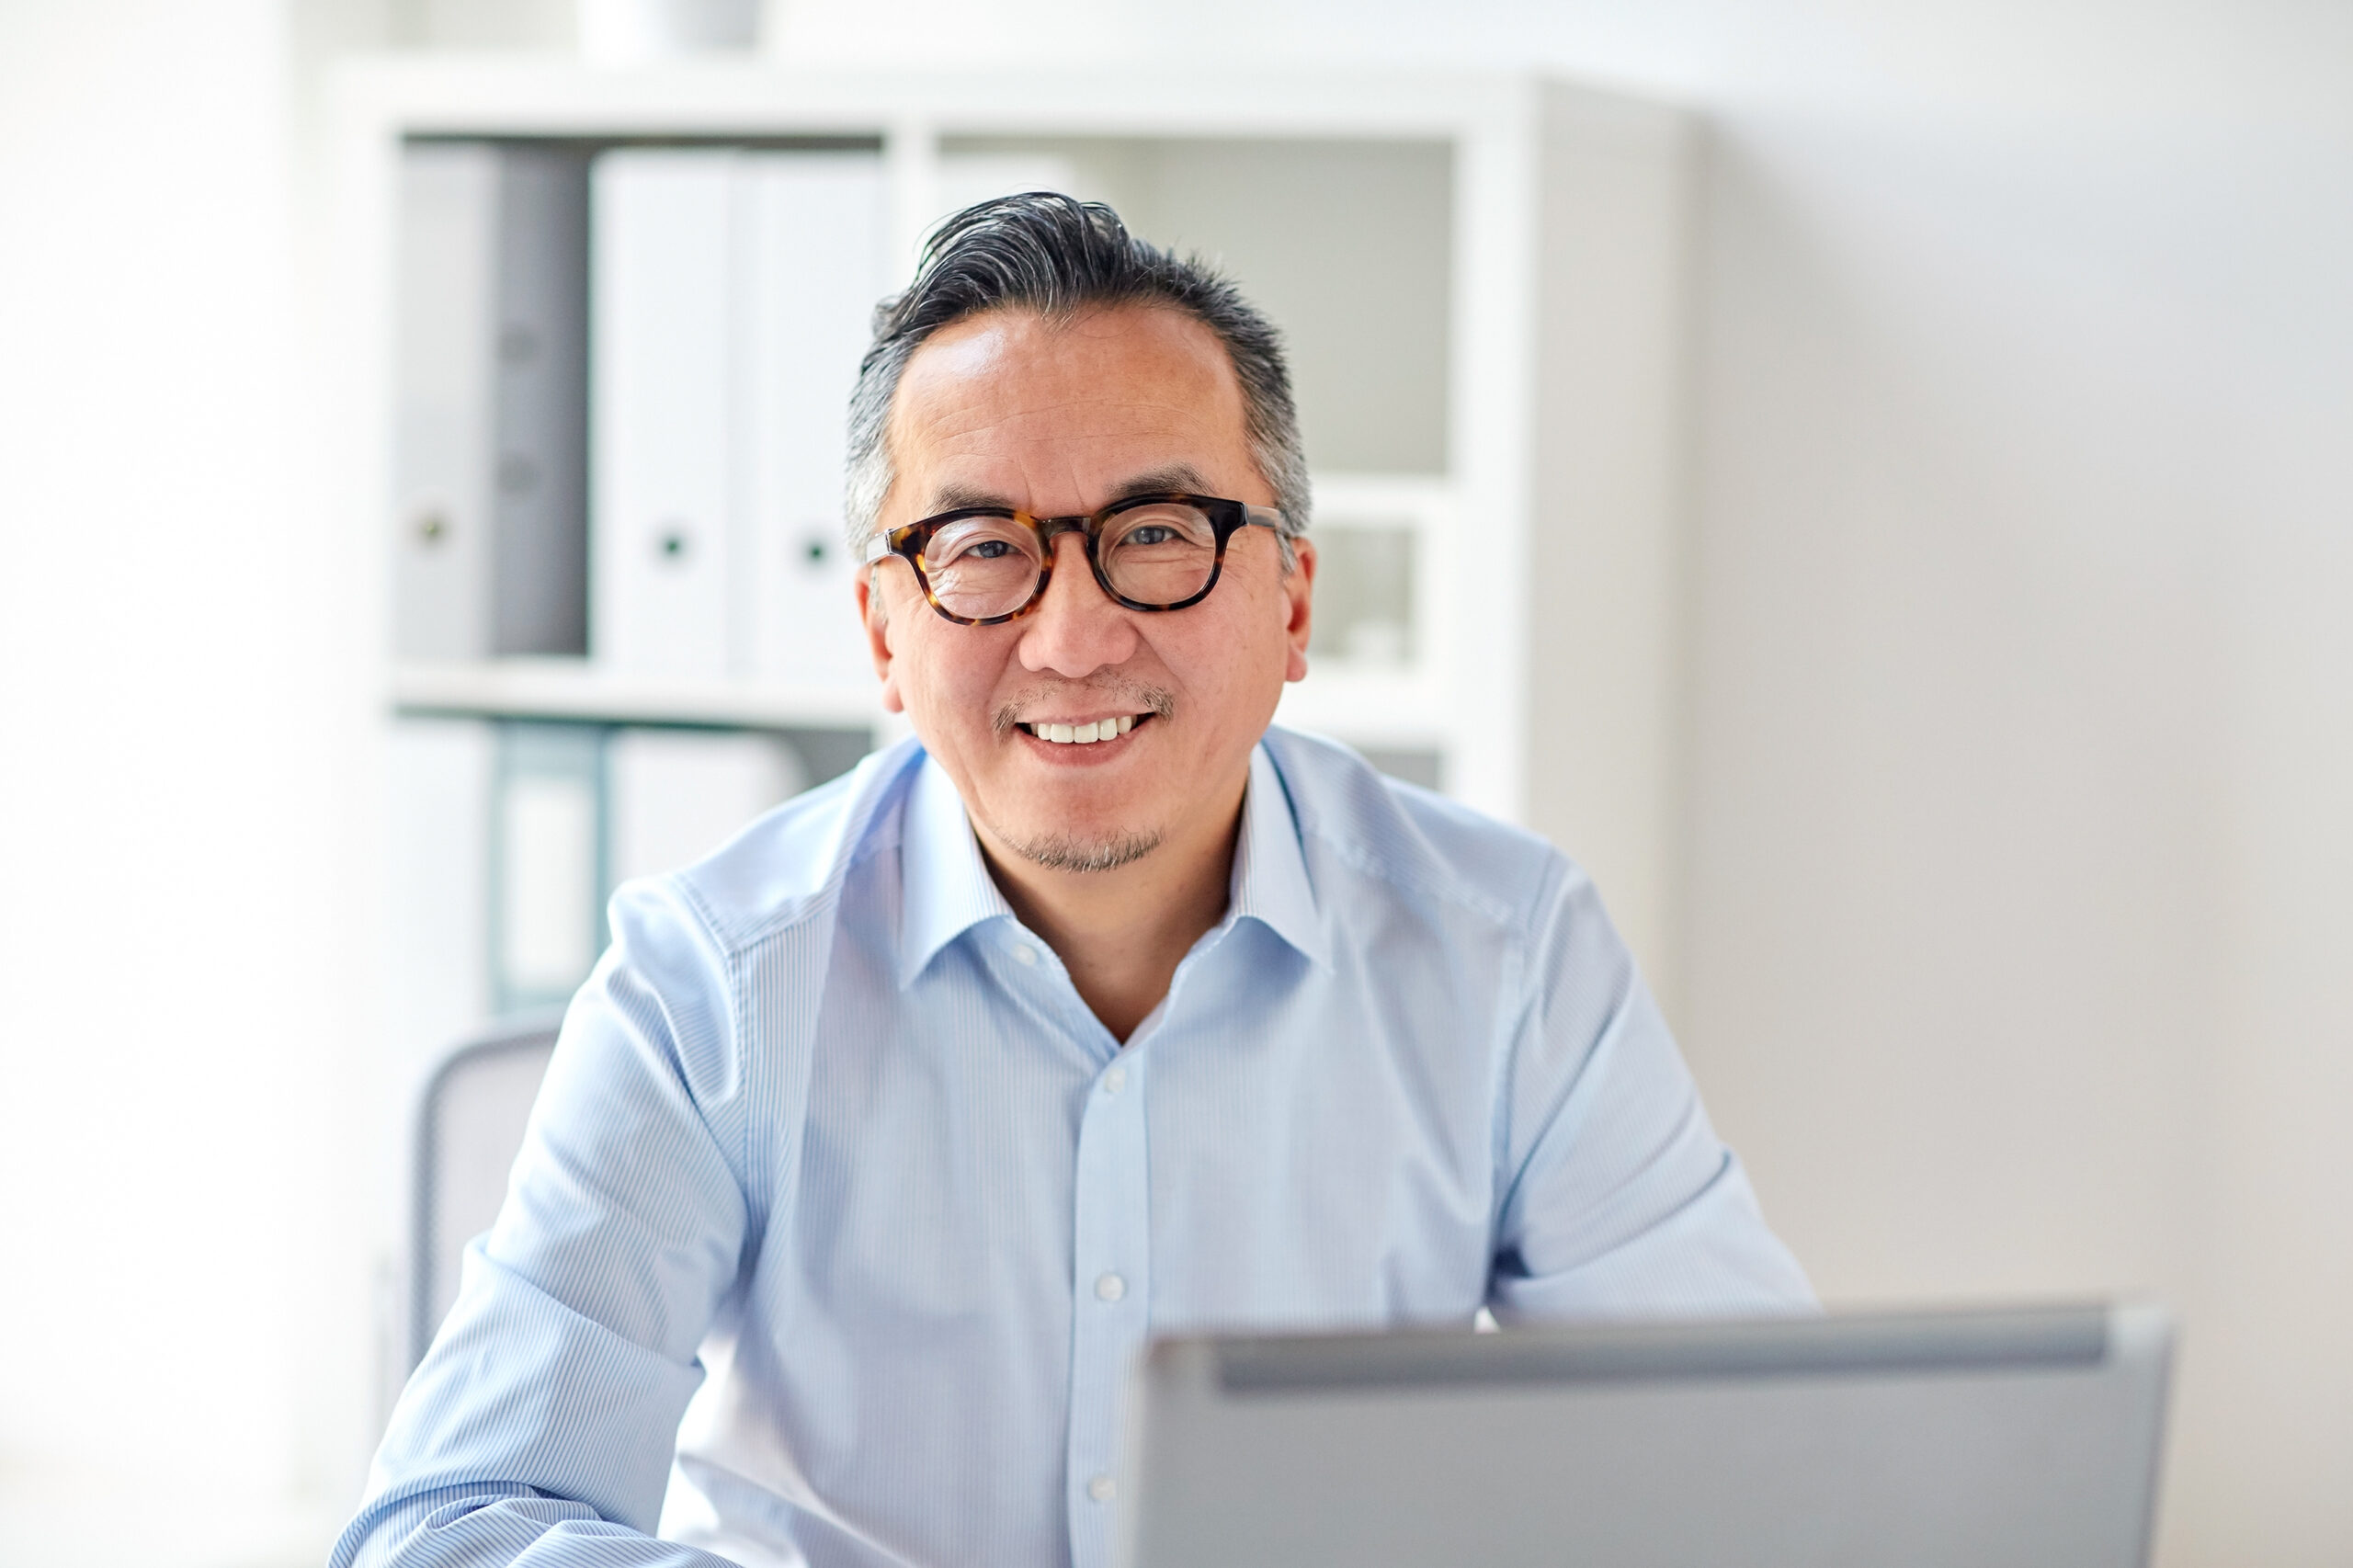 Man in glasses smiling over laptop